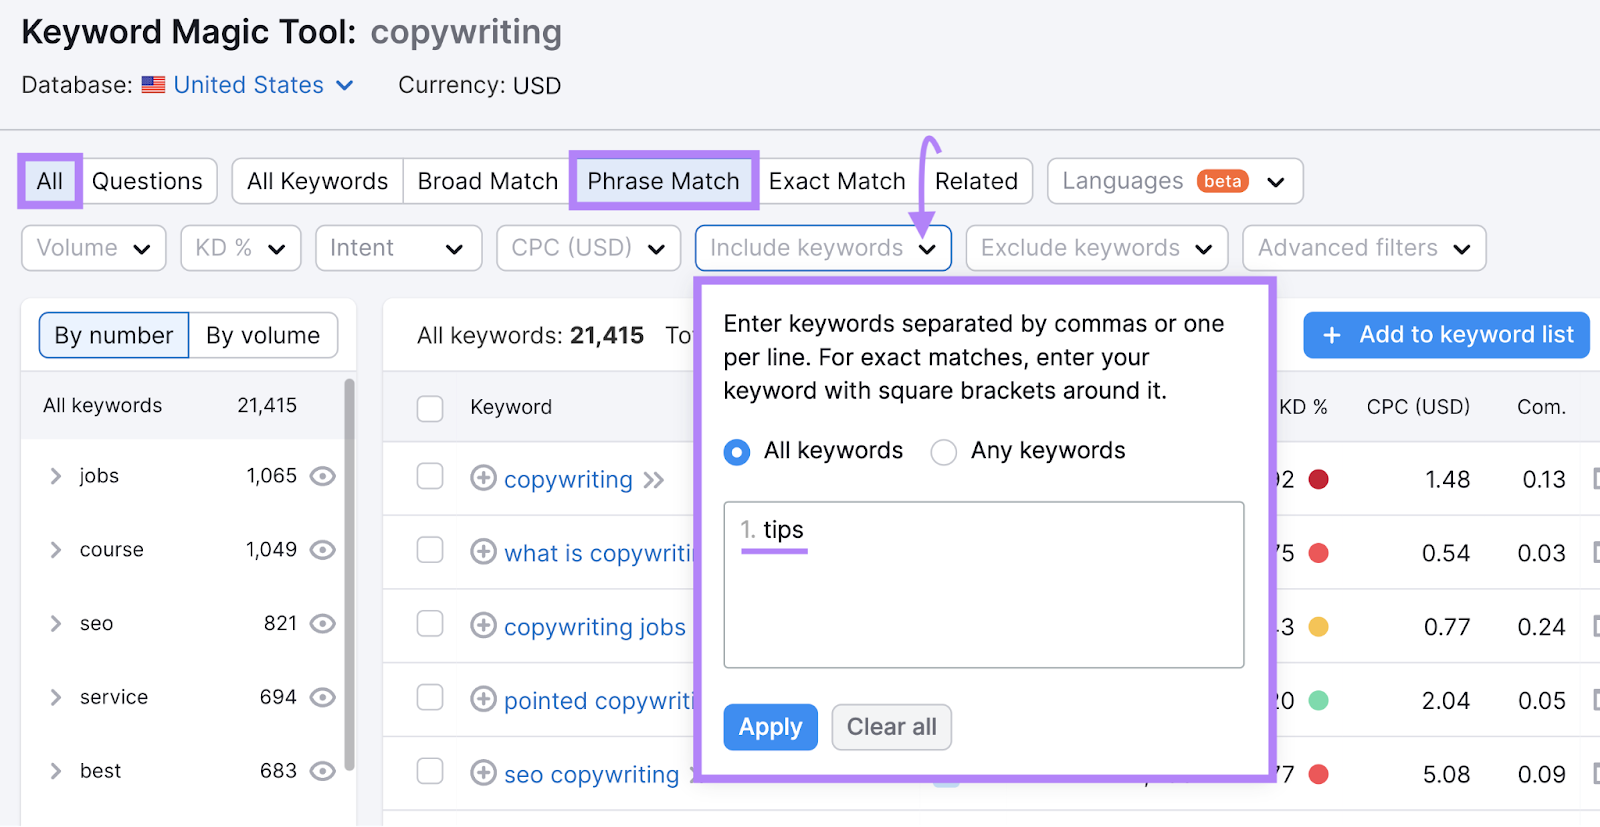 "All," "Phrase Match," and "Include keywords" filters highlighted successful  Keyword Magic Tool